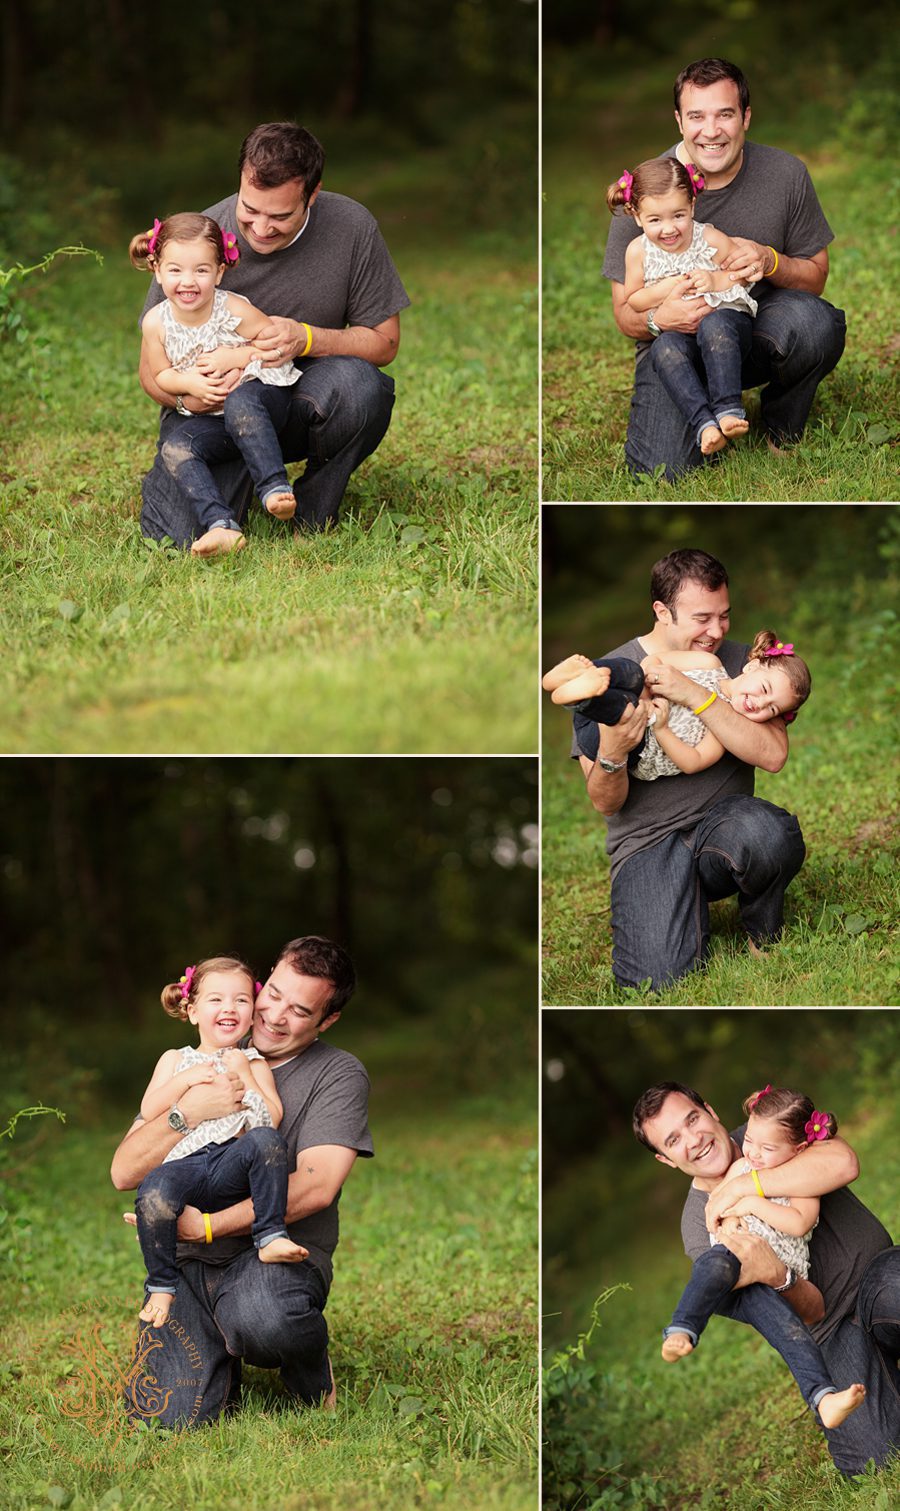 Tickling portraits of father and daughter in St. Louis Queeny Park taken by Yvonne Niemann Photography.